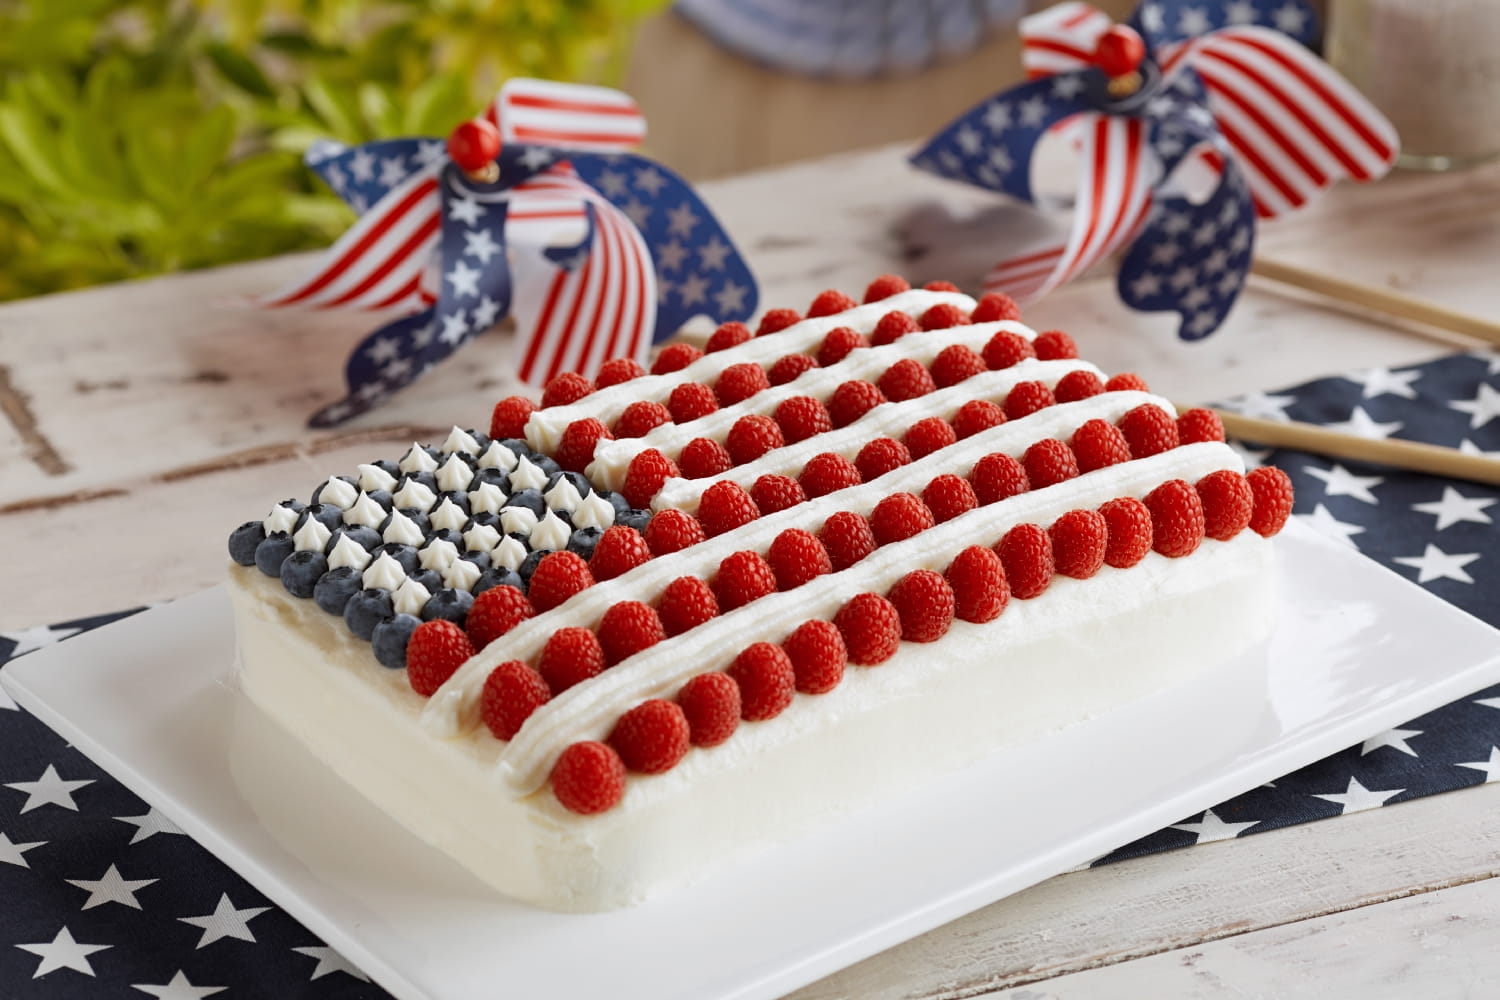 Twitter american_cake Cakes and